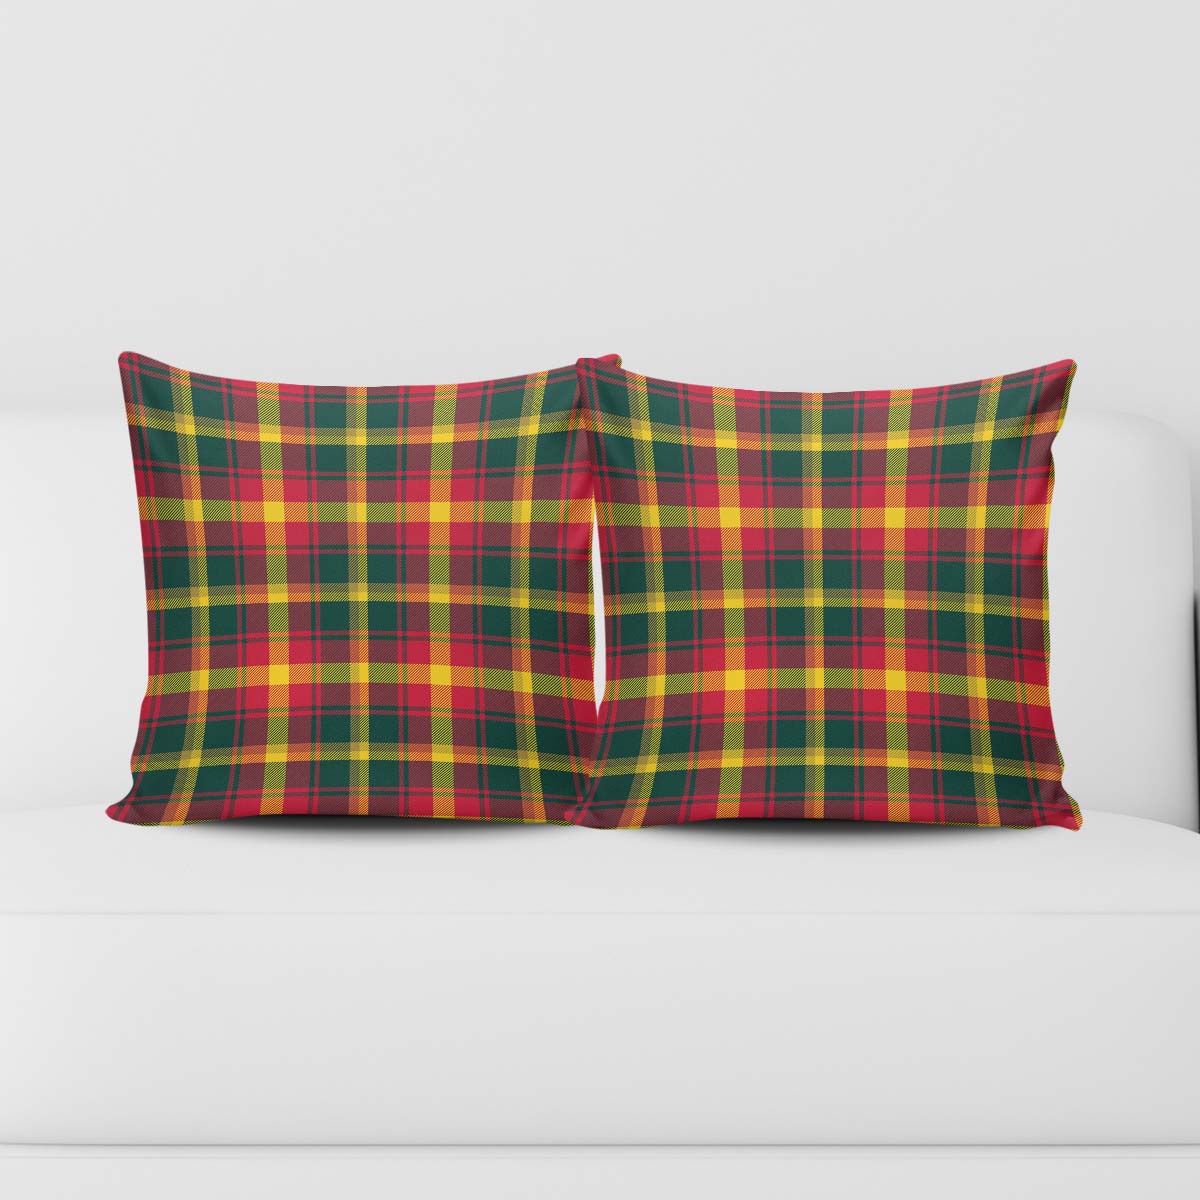 Maple Leaf Canada Tartan Pillow Cover Square Pillow Cover - Tartanvibesclothing